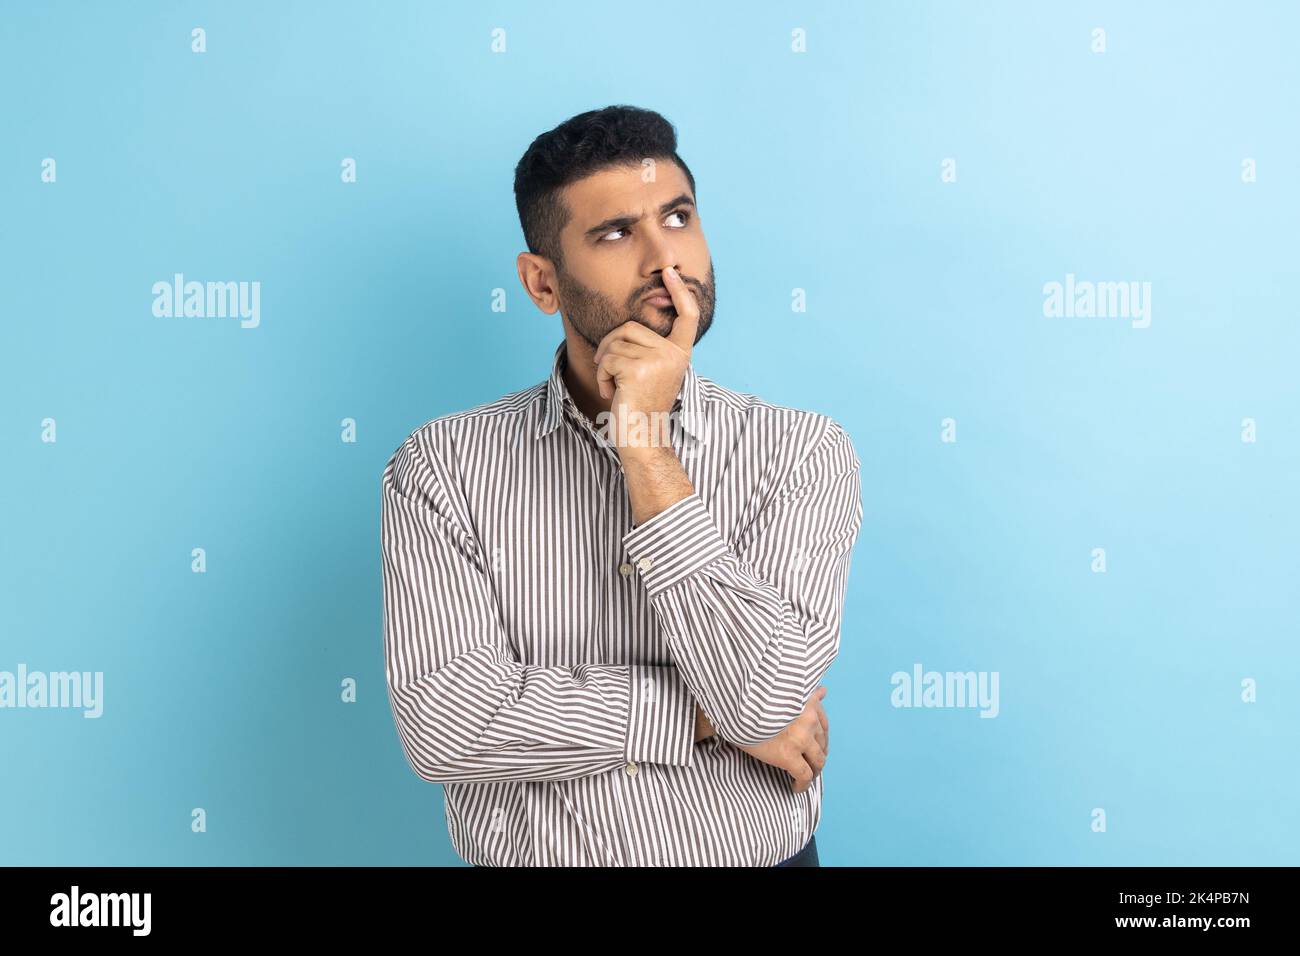 Portrait of thoughtful handsome bearded businessman holding his chin and pondering idea, confused not sure about solution, wearing striped shirt. Indoor studio shot isolated on blue background. Stock Photo